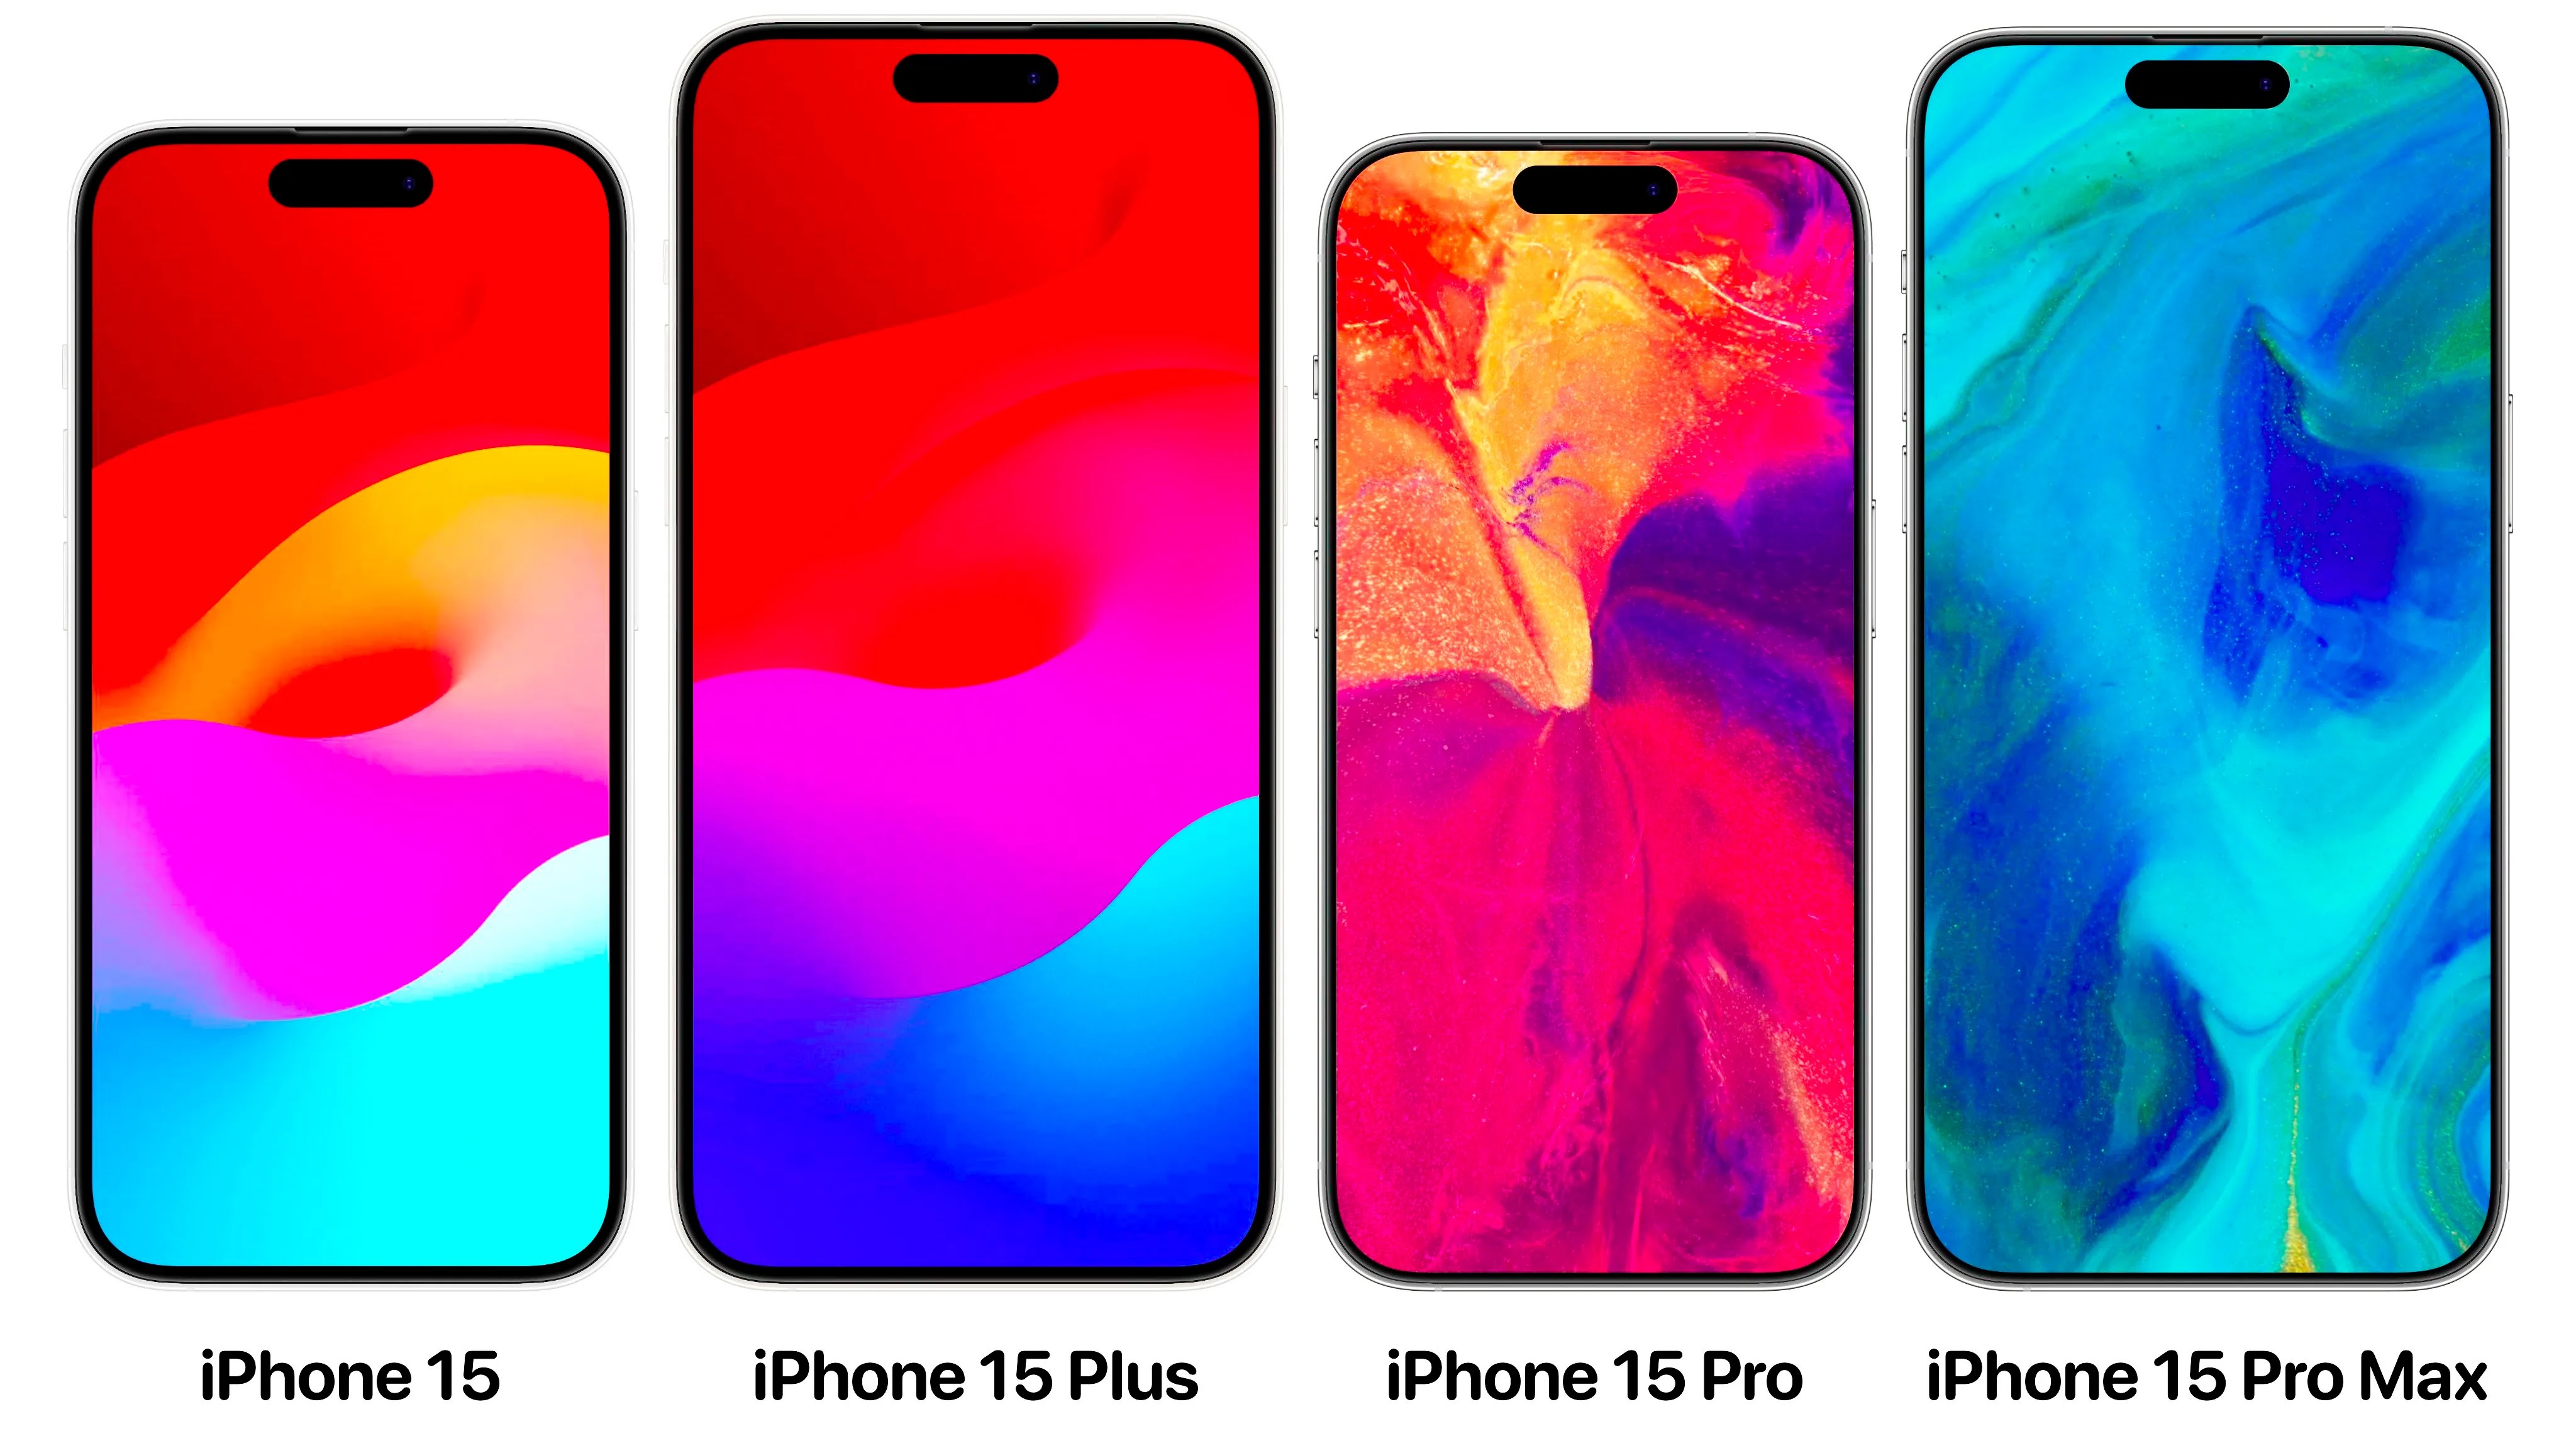 New Apple iPhone 15 Pro Max 5G: Deals, Prices, Colors & Specs